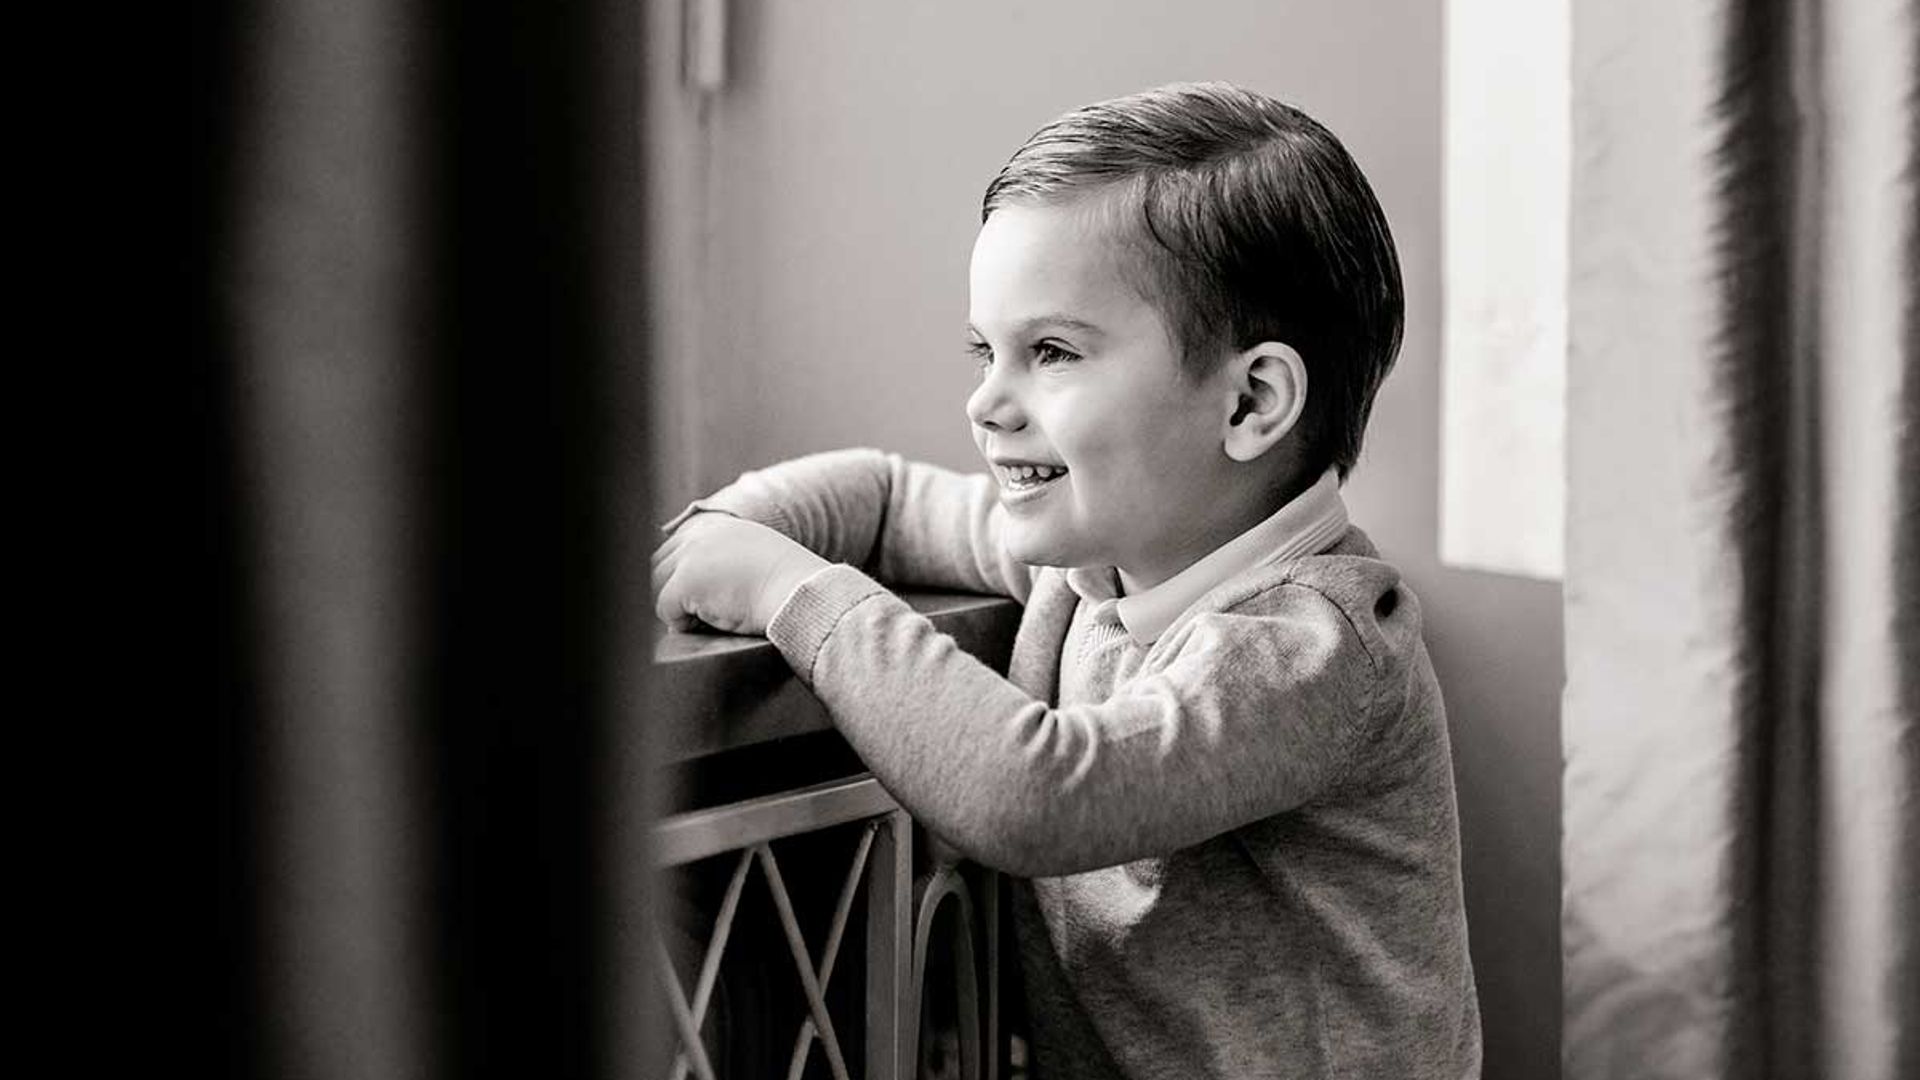 New precious photos released of Prince Oscar of Sweden to mark fourth birthday